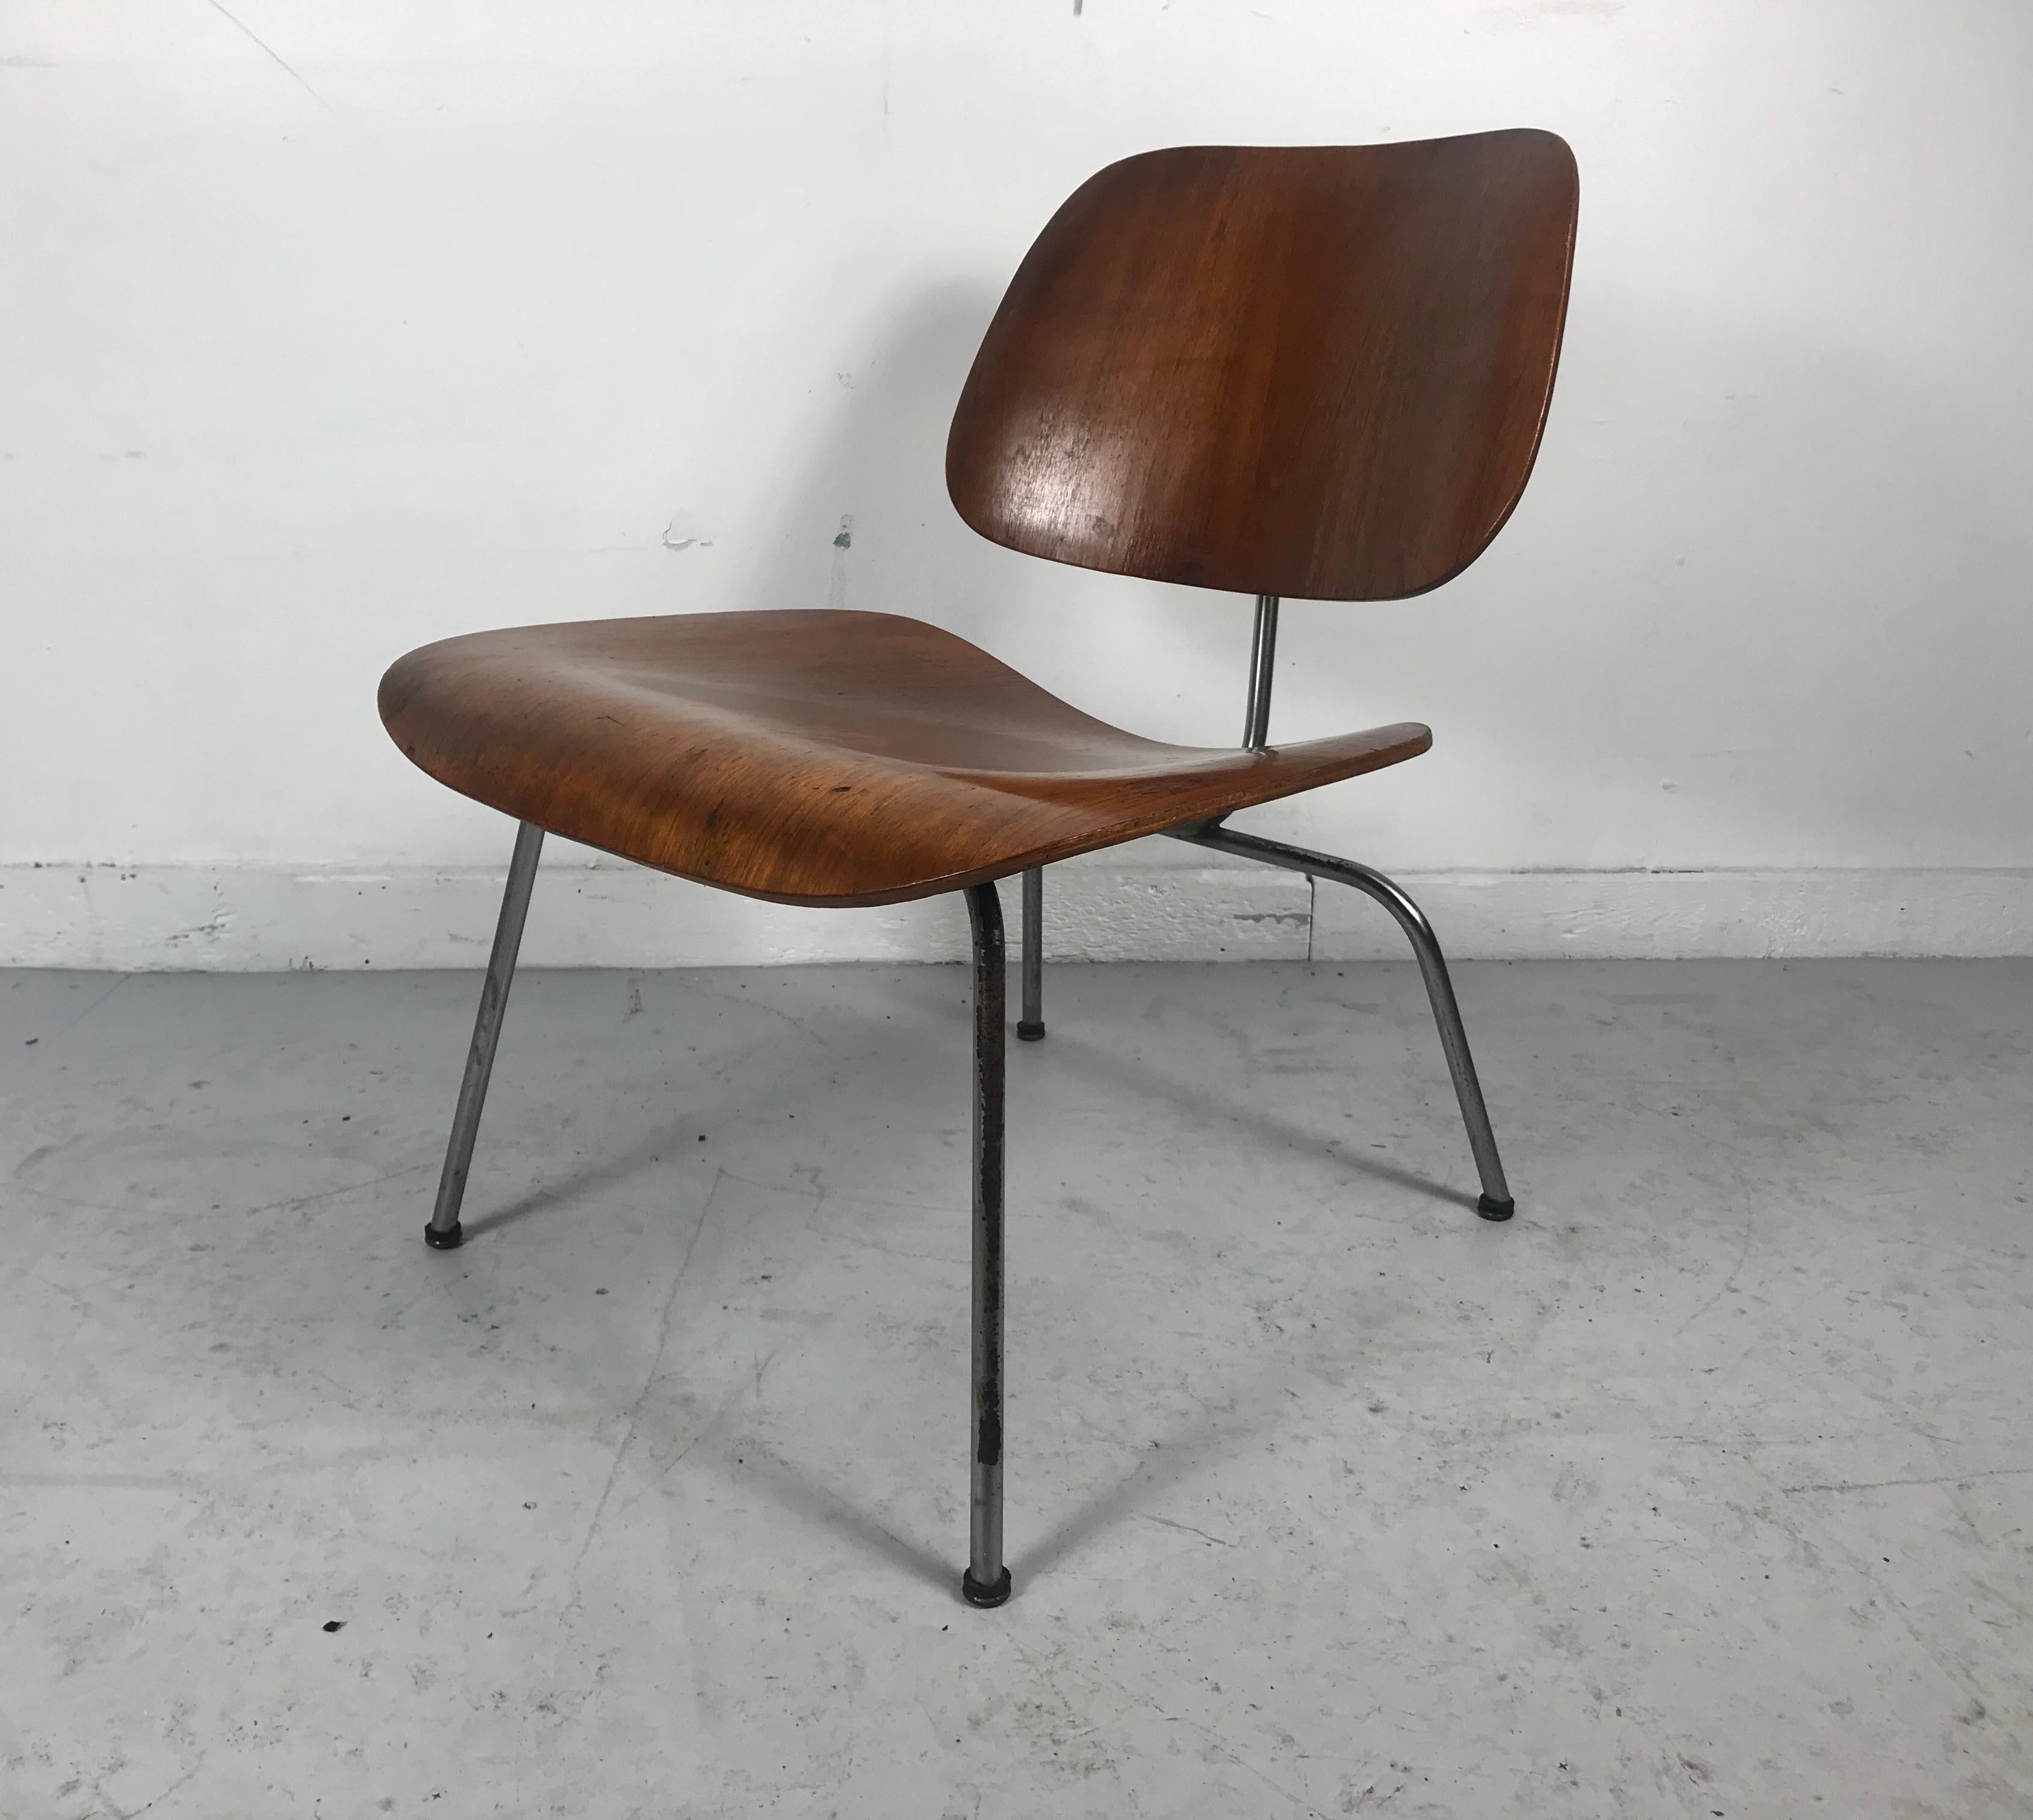 Nice early example, 50-51. Plywood and metal lounge chair designed by Charles and Ray Eames for Herman Miller, chair retains its original label, developmental mounts, domes of silence feet. Nice original condition, chromed frame showing signs of